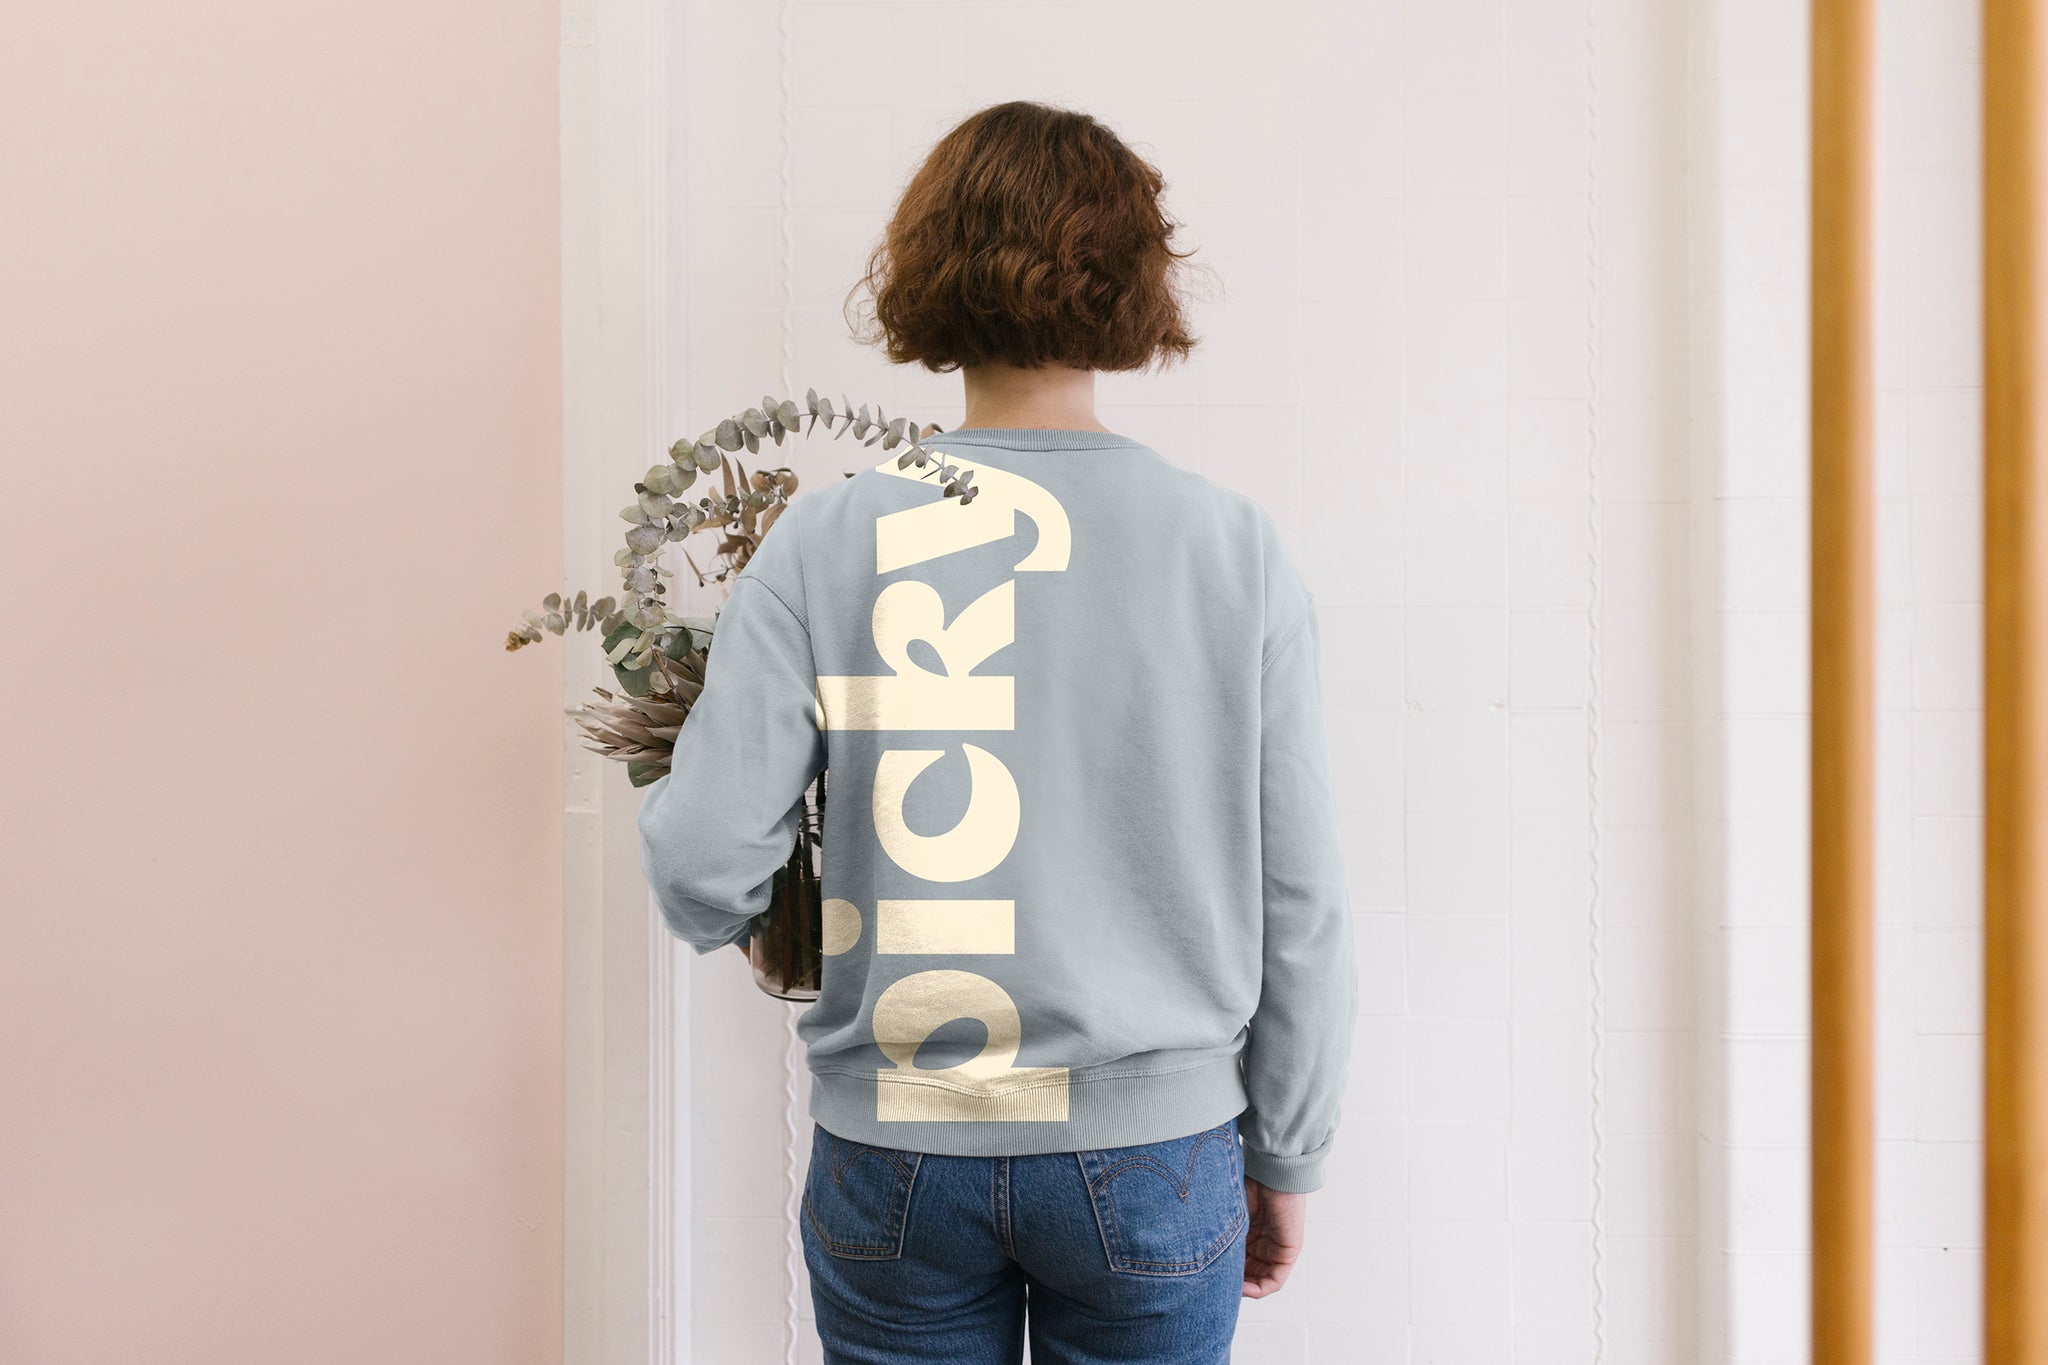 A lady is standing in front of a wall holding a eucalyptus plant. She is wearing a grey sweatshirt with the word Picky written on the back, written from the left hand side towards her shoulder. Her hair is brown and sits at the height of her ears. The background is a soft pink.